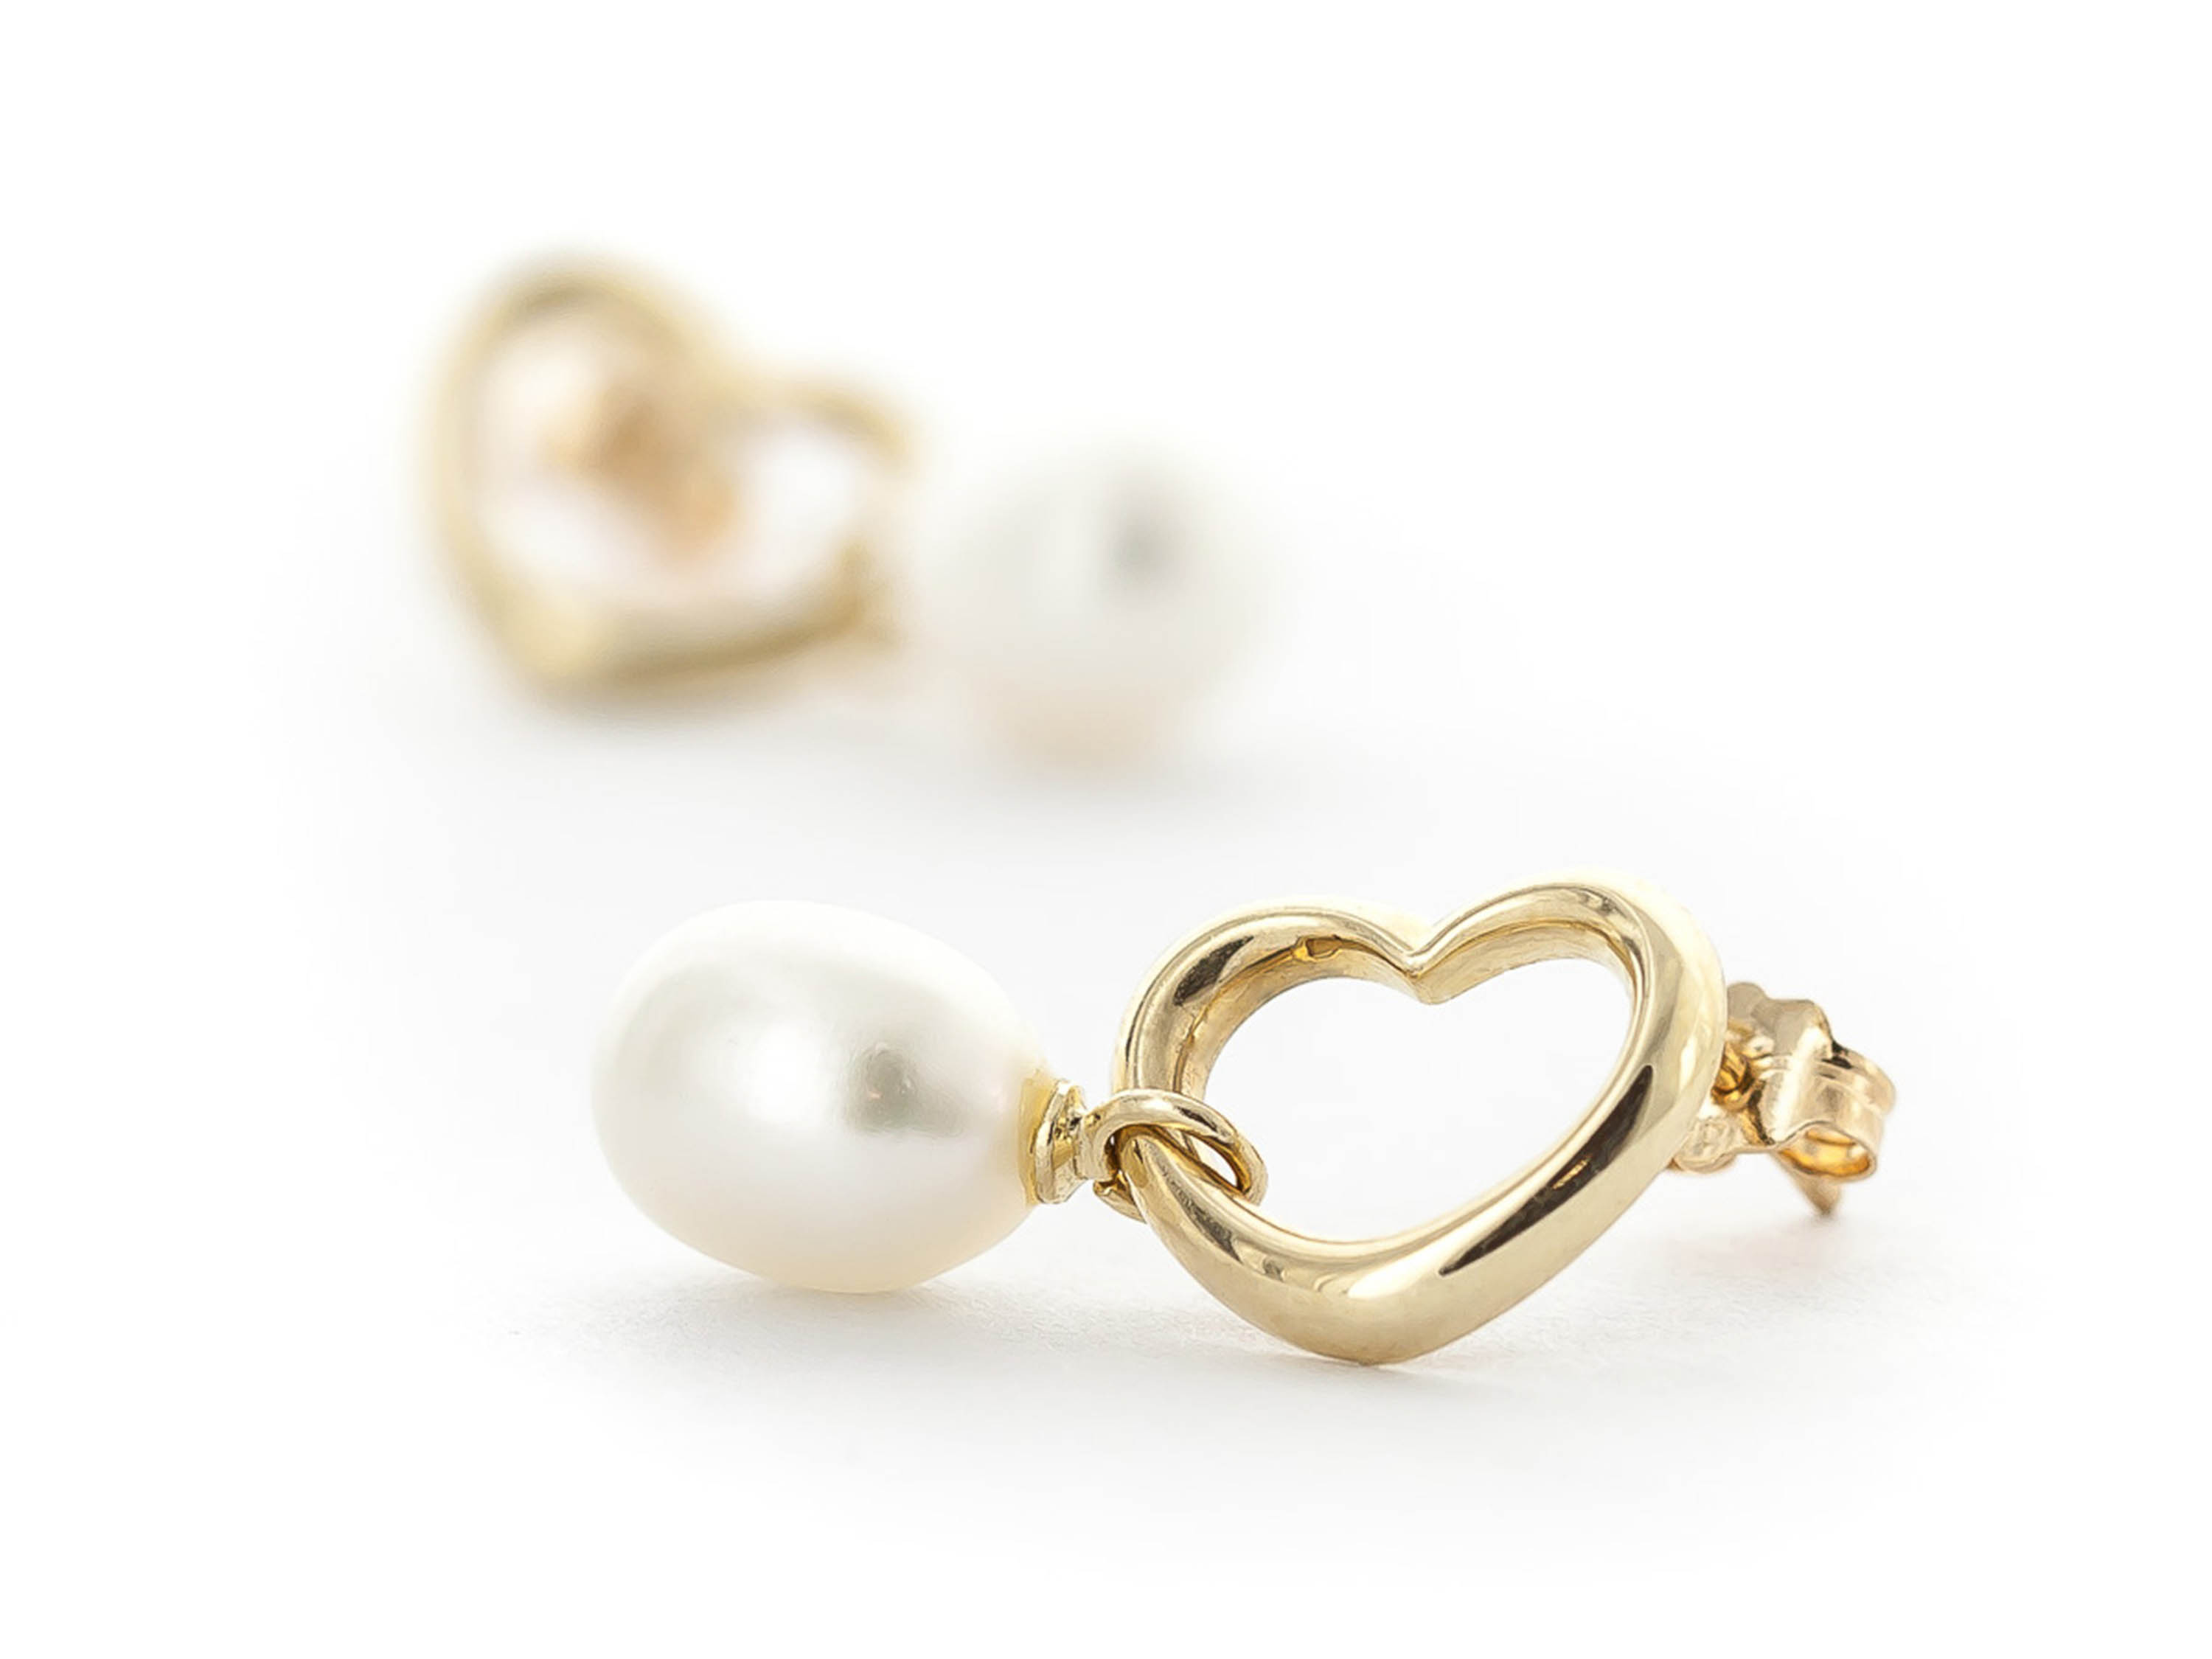 Galaxy Gold 8 Carat 14k Solid Gold Open Heart Stud Earrings with Dangling Freshwater-cultured Pearls - image 4 of 5